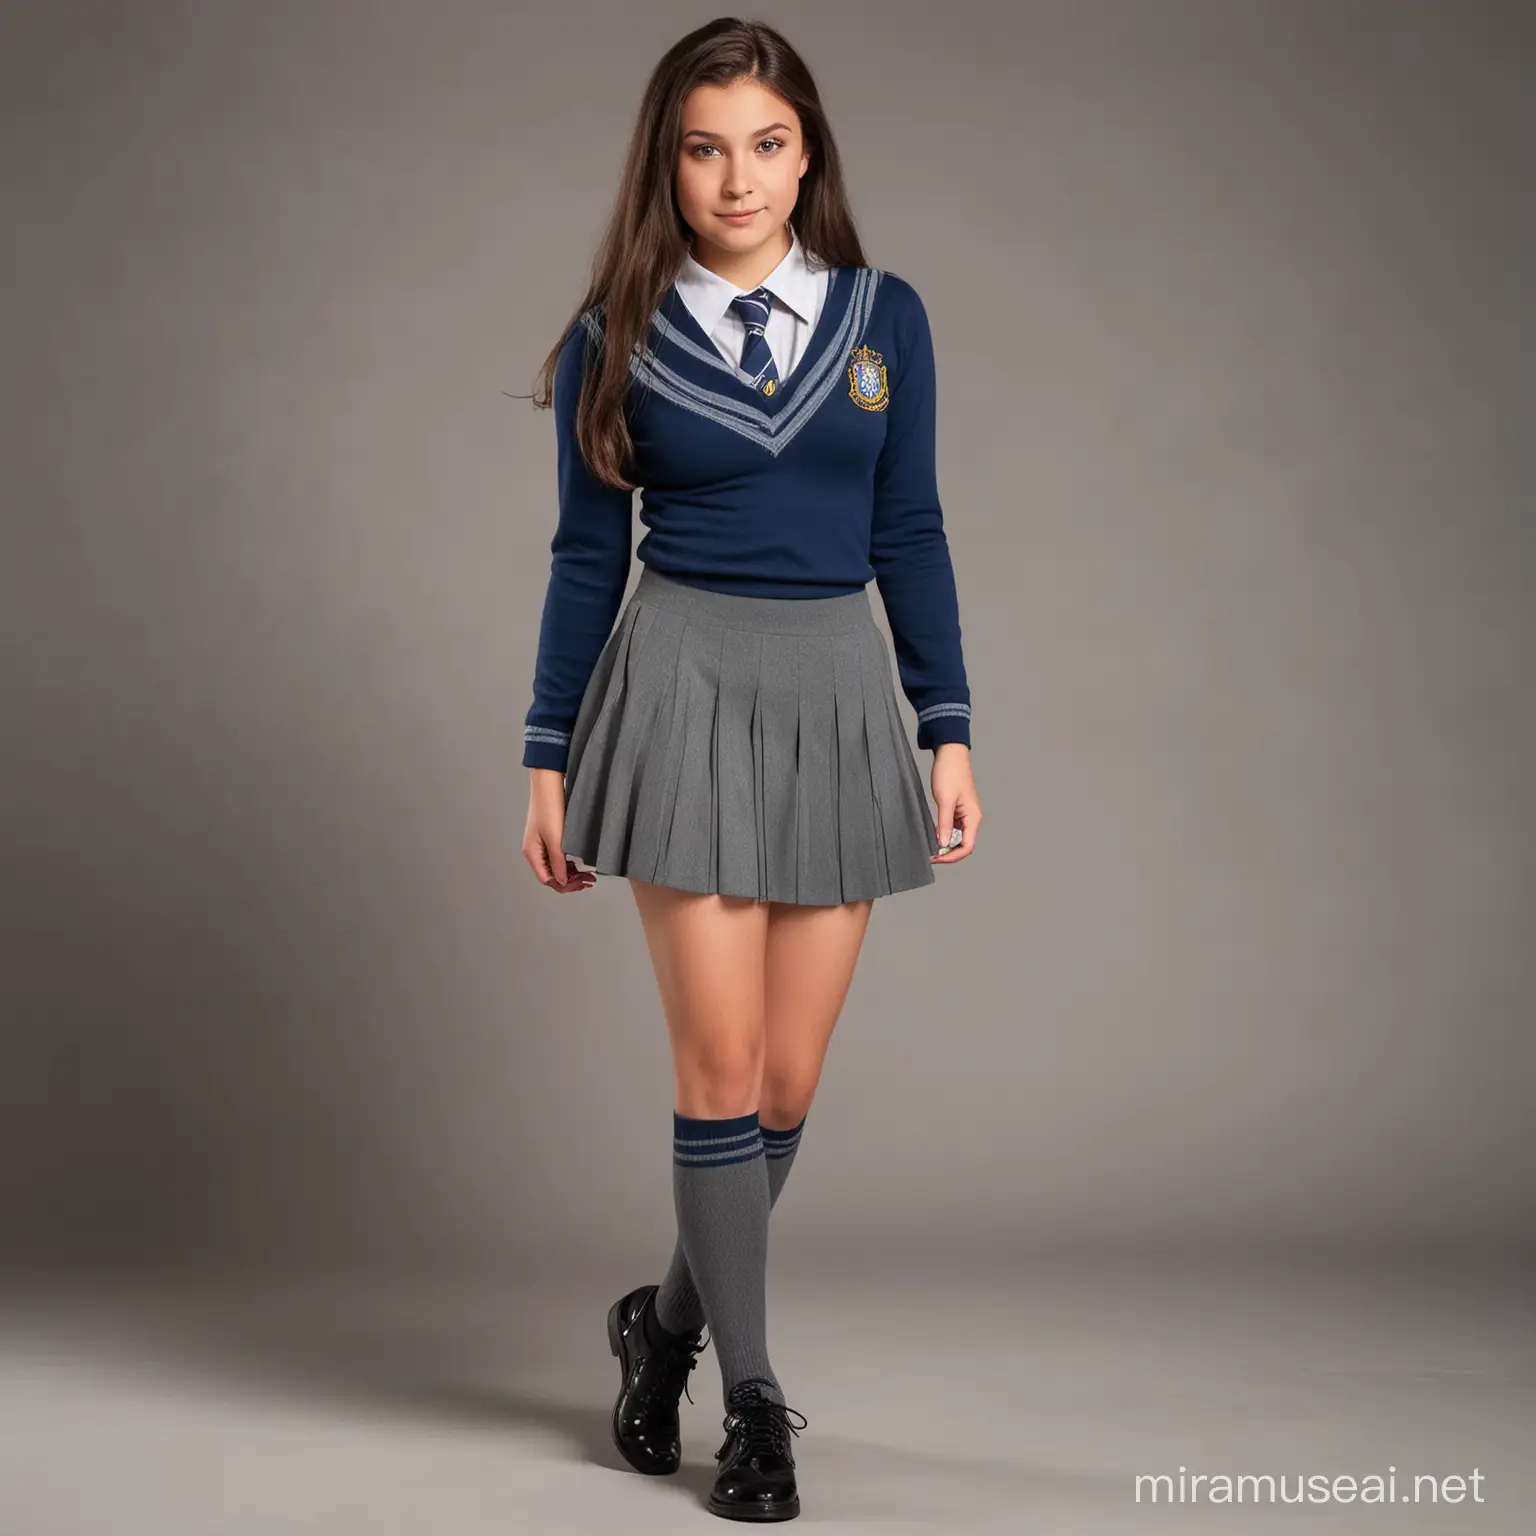 14 year old white girl with midlength dark brown hair, she is pretty and has large breasts, dressed in Ravenclaw uniform, grey skirt, grey knitted pantihose, black shoes